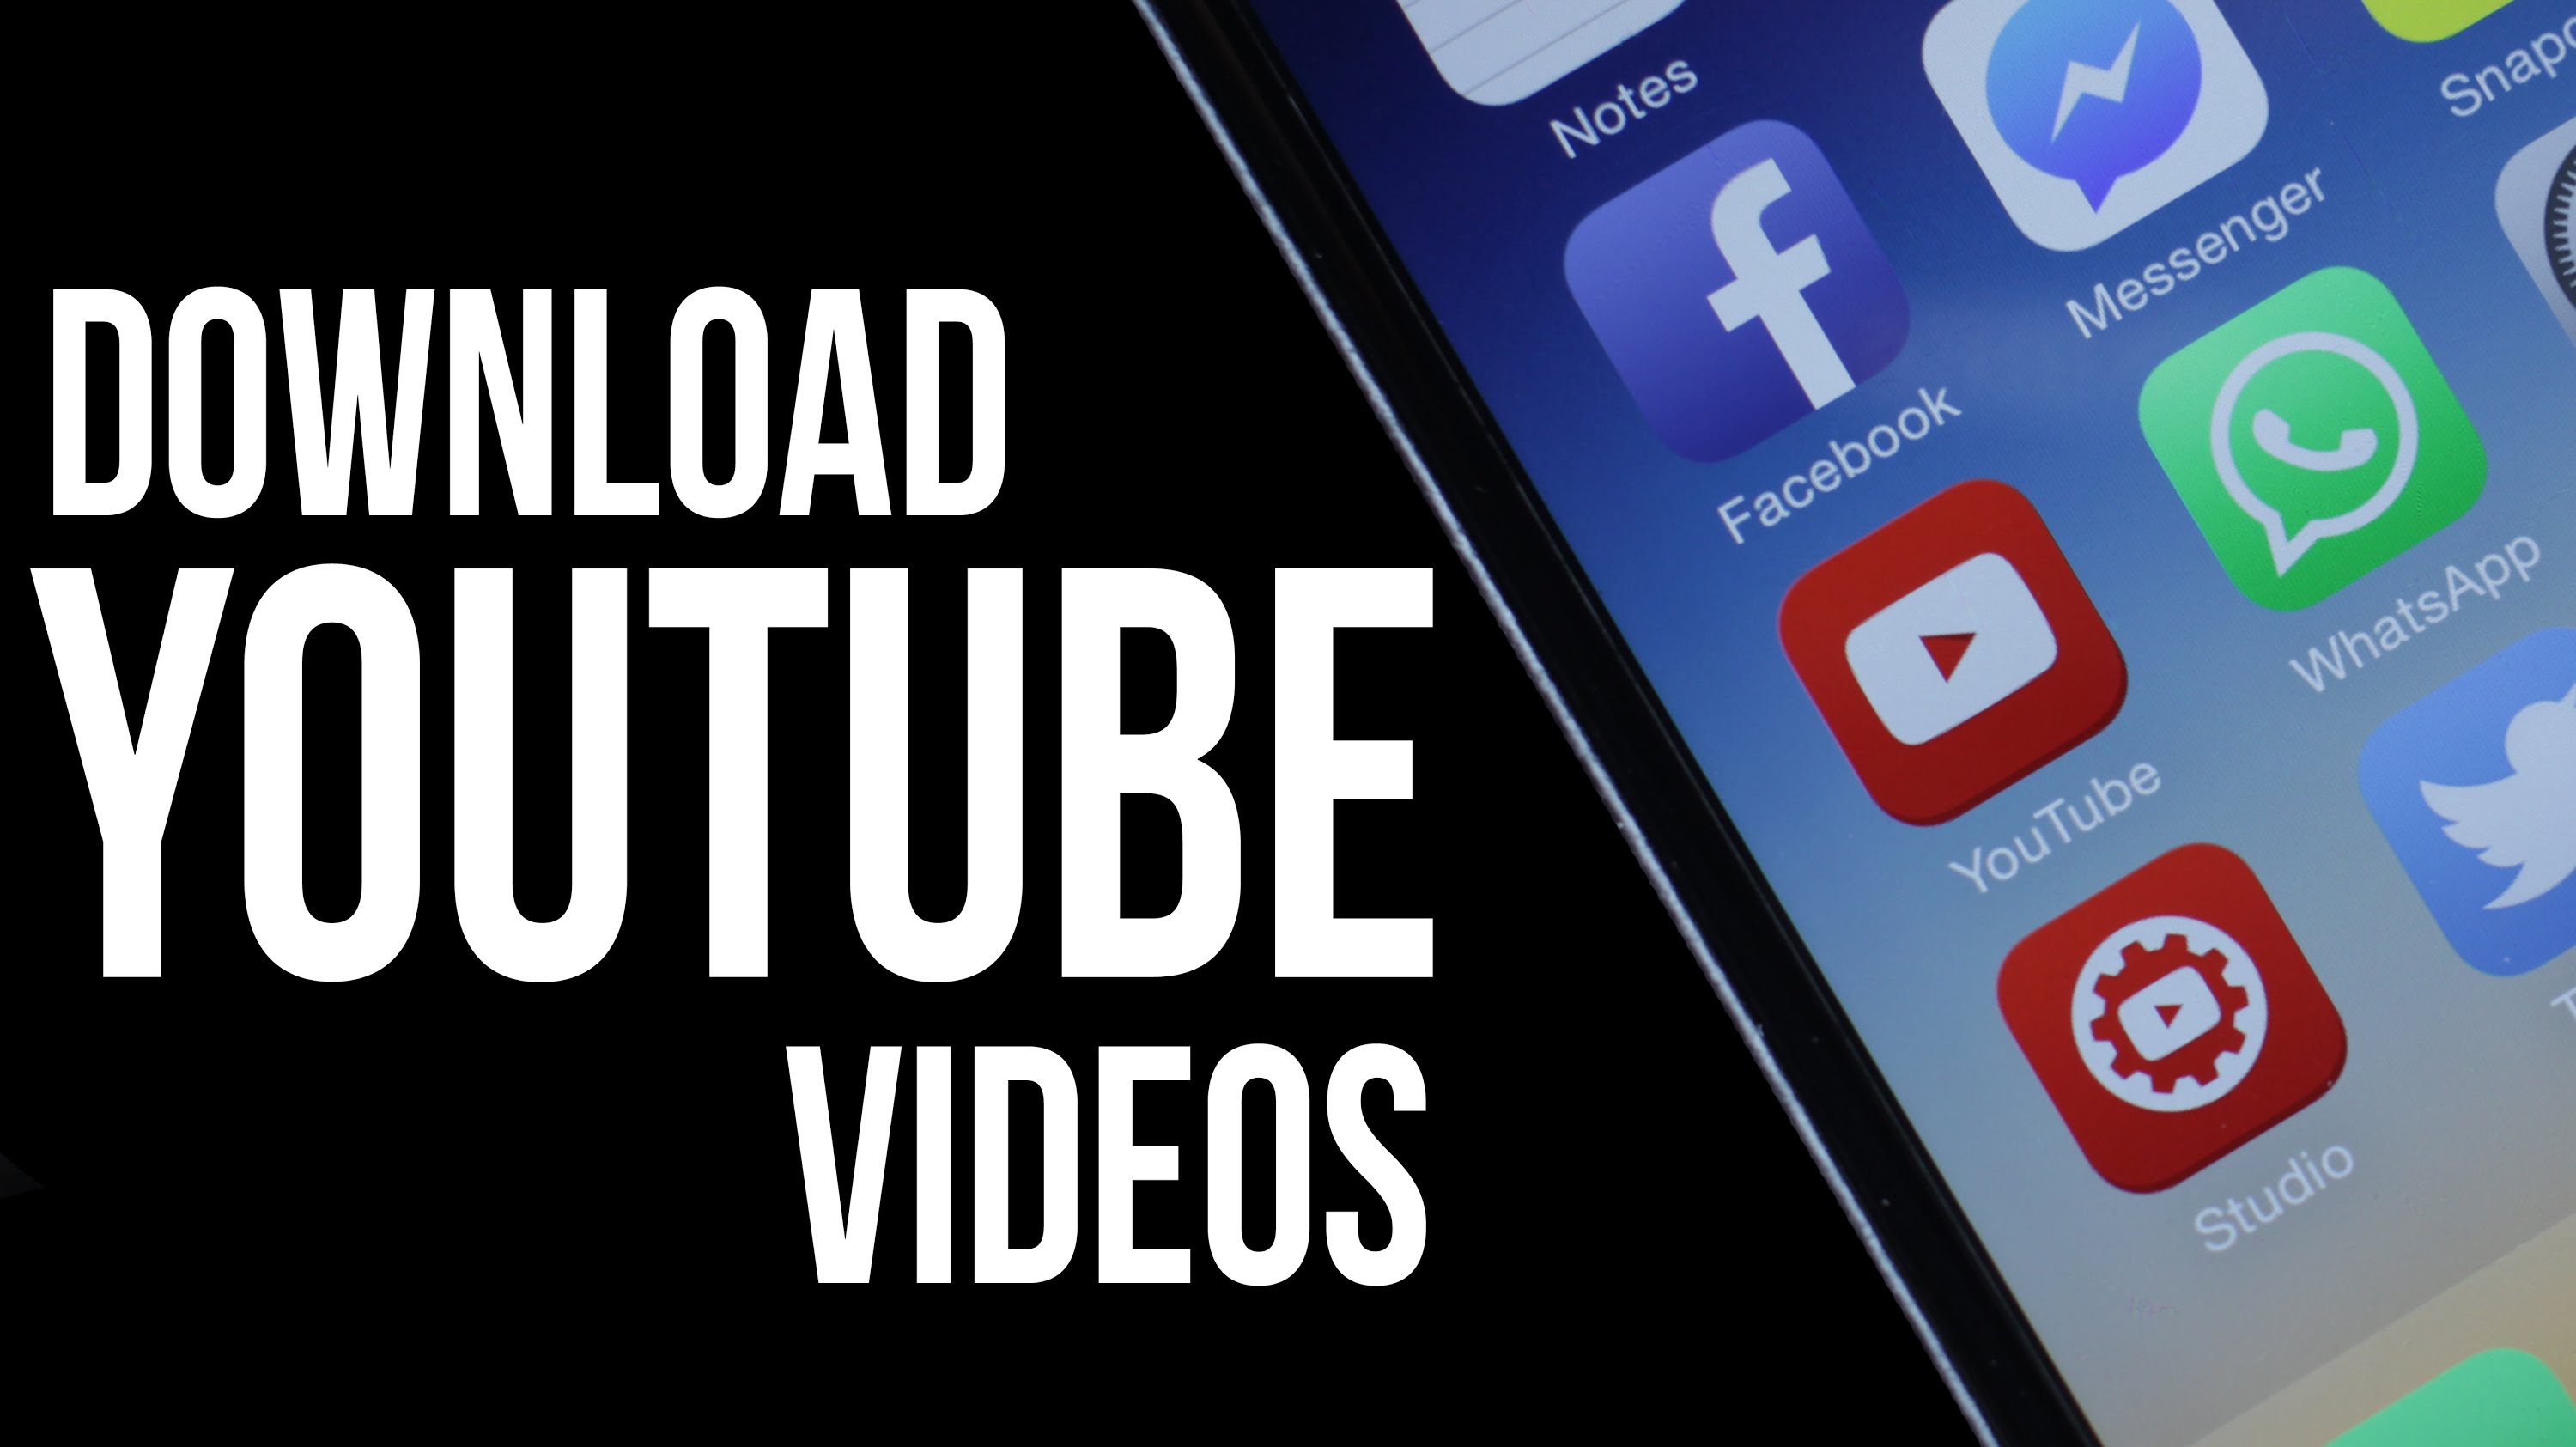 How To Download Youtube Videos On iPhone 5